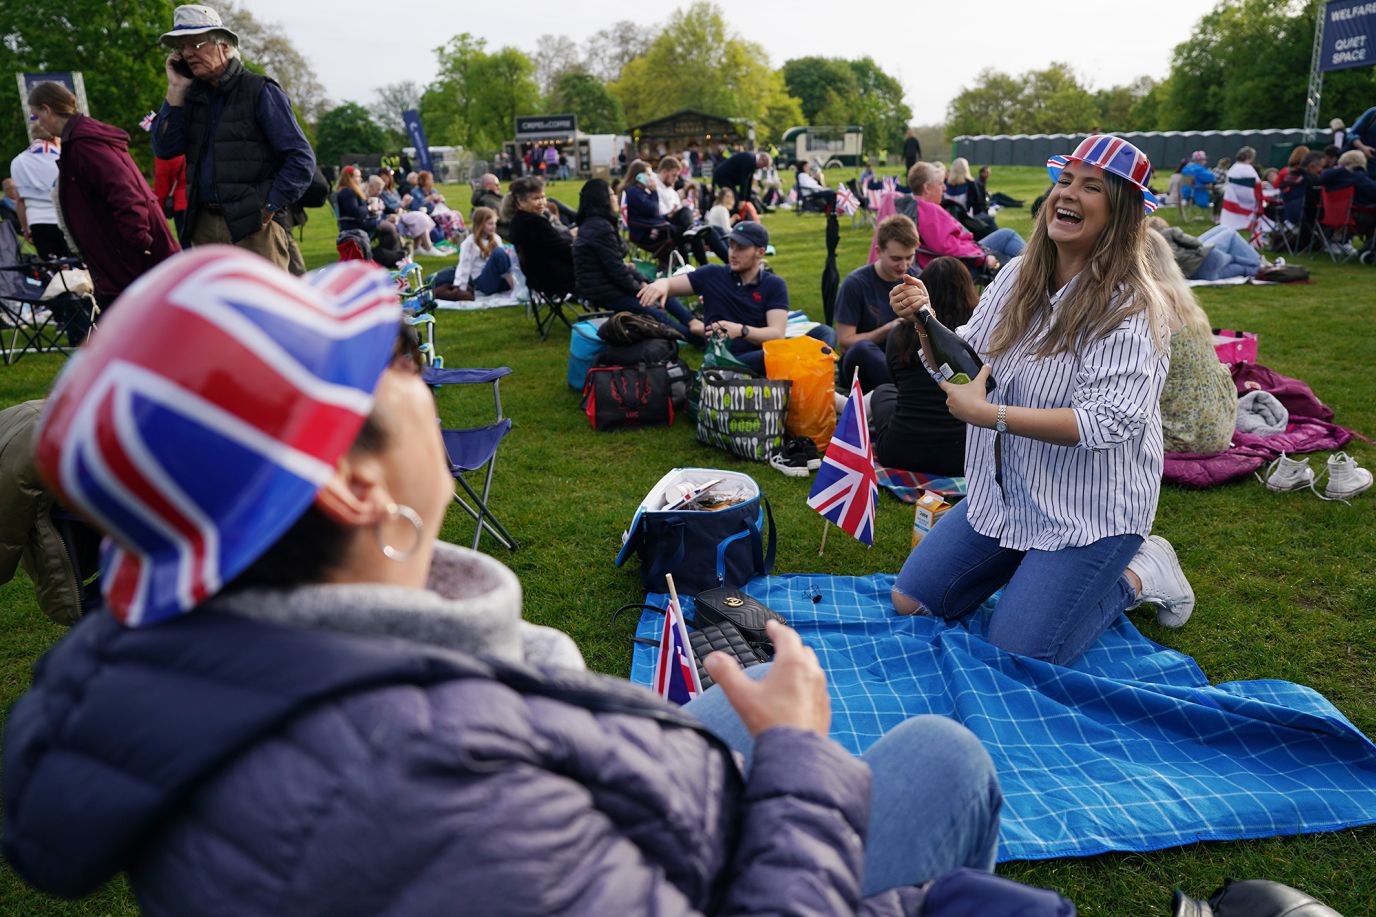 Members of the public get in the party mood in London's Hyde Park.